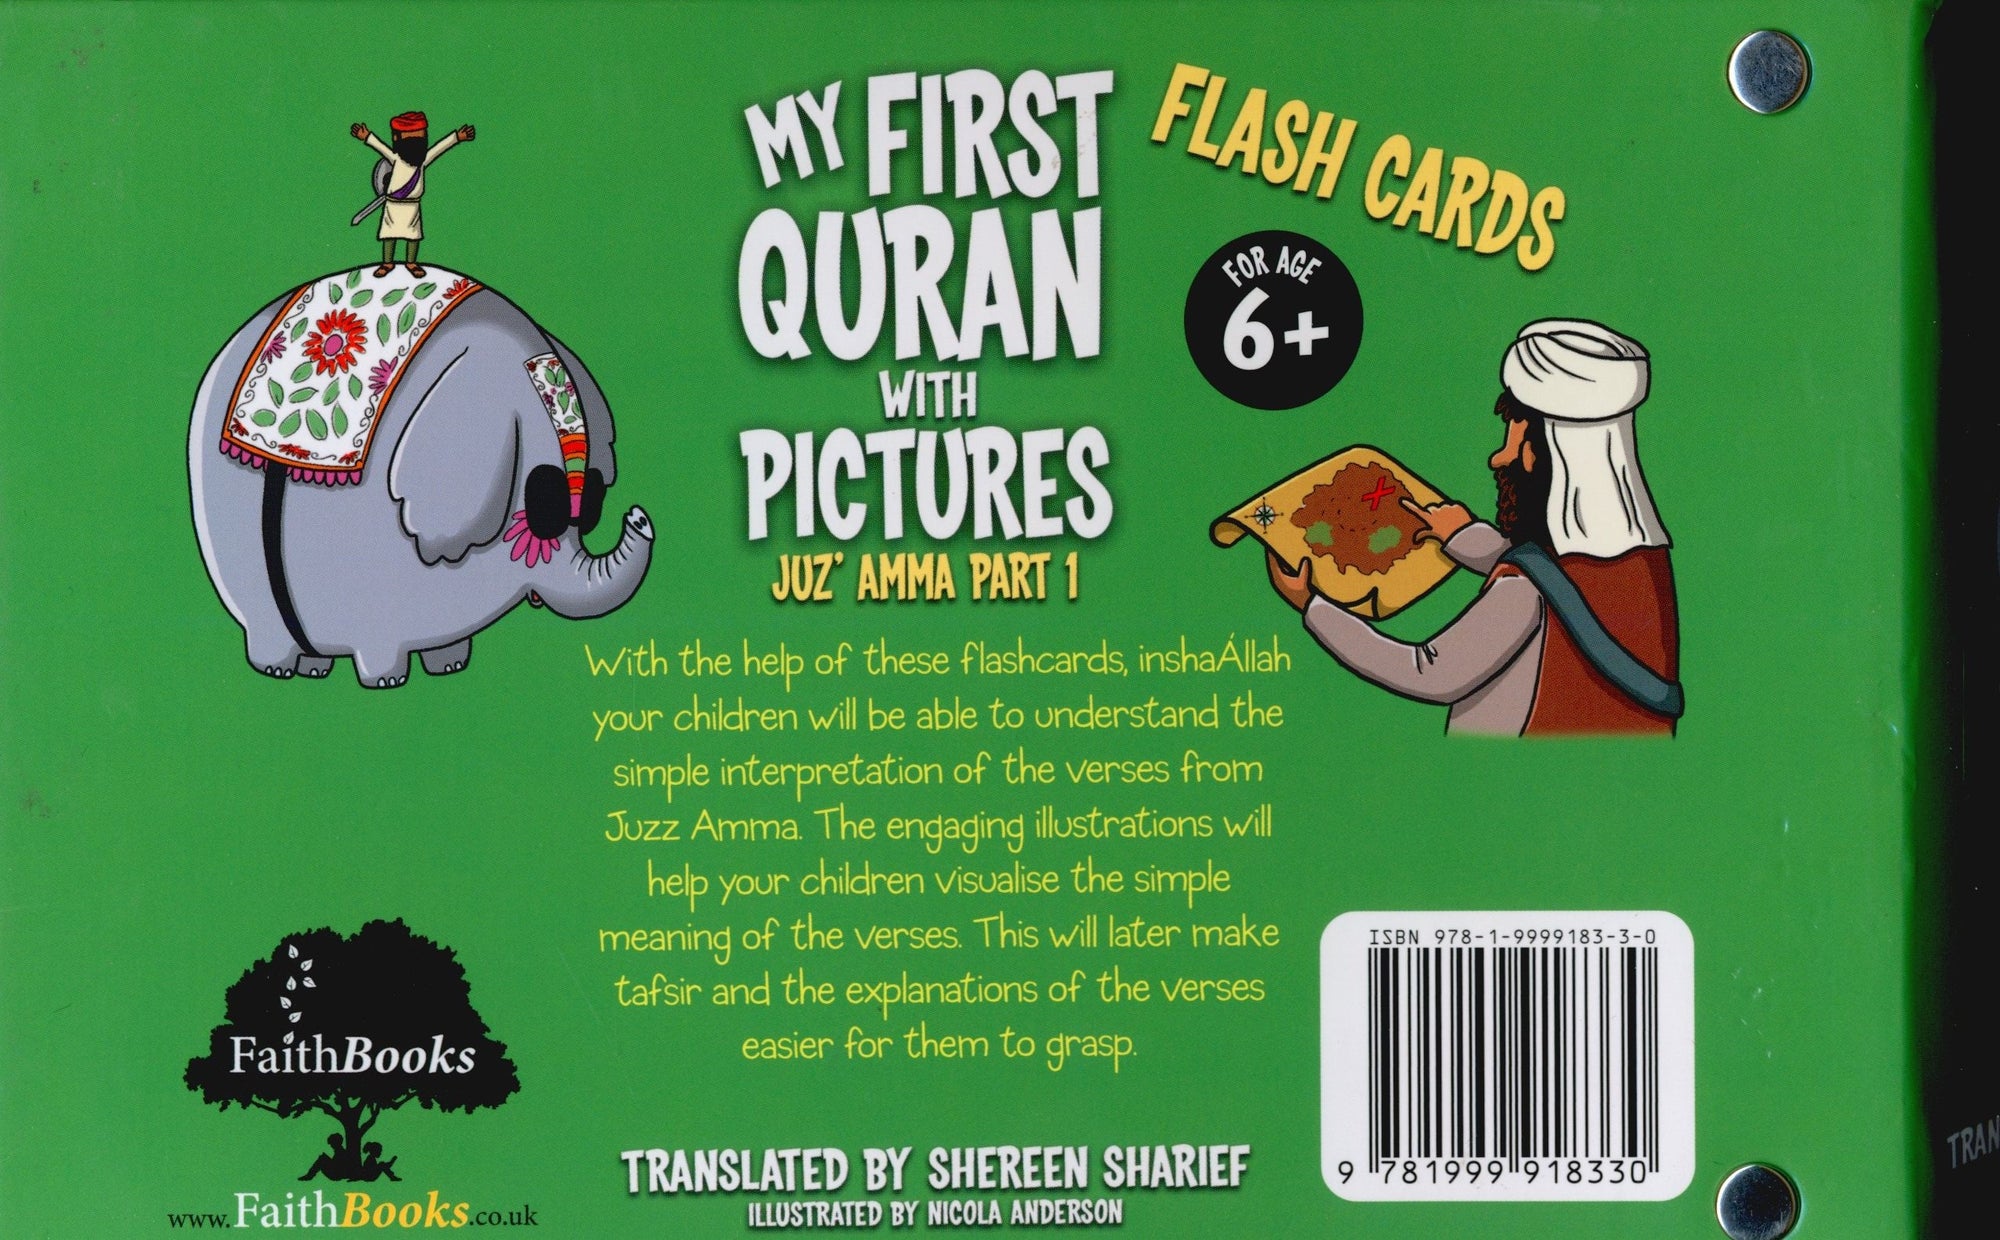 My First Quran With Pictures, Juz Amma Part 1 - Flash Cards